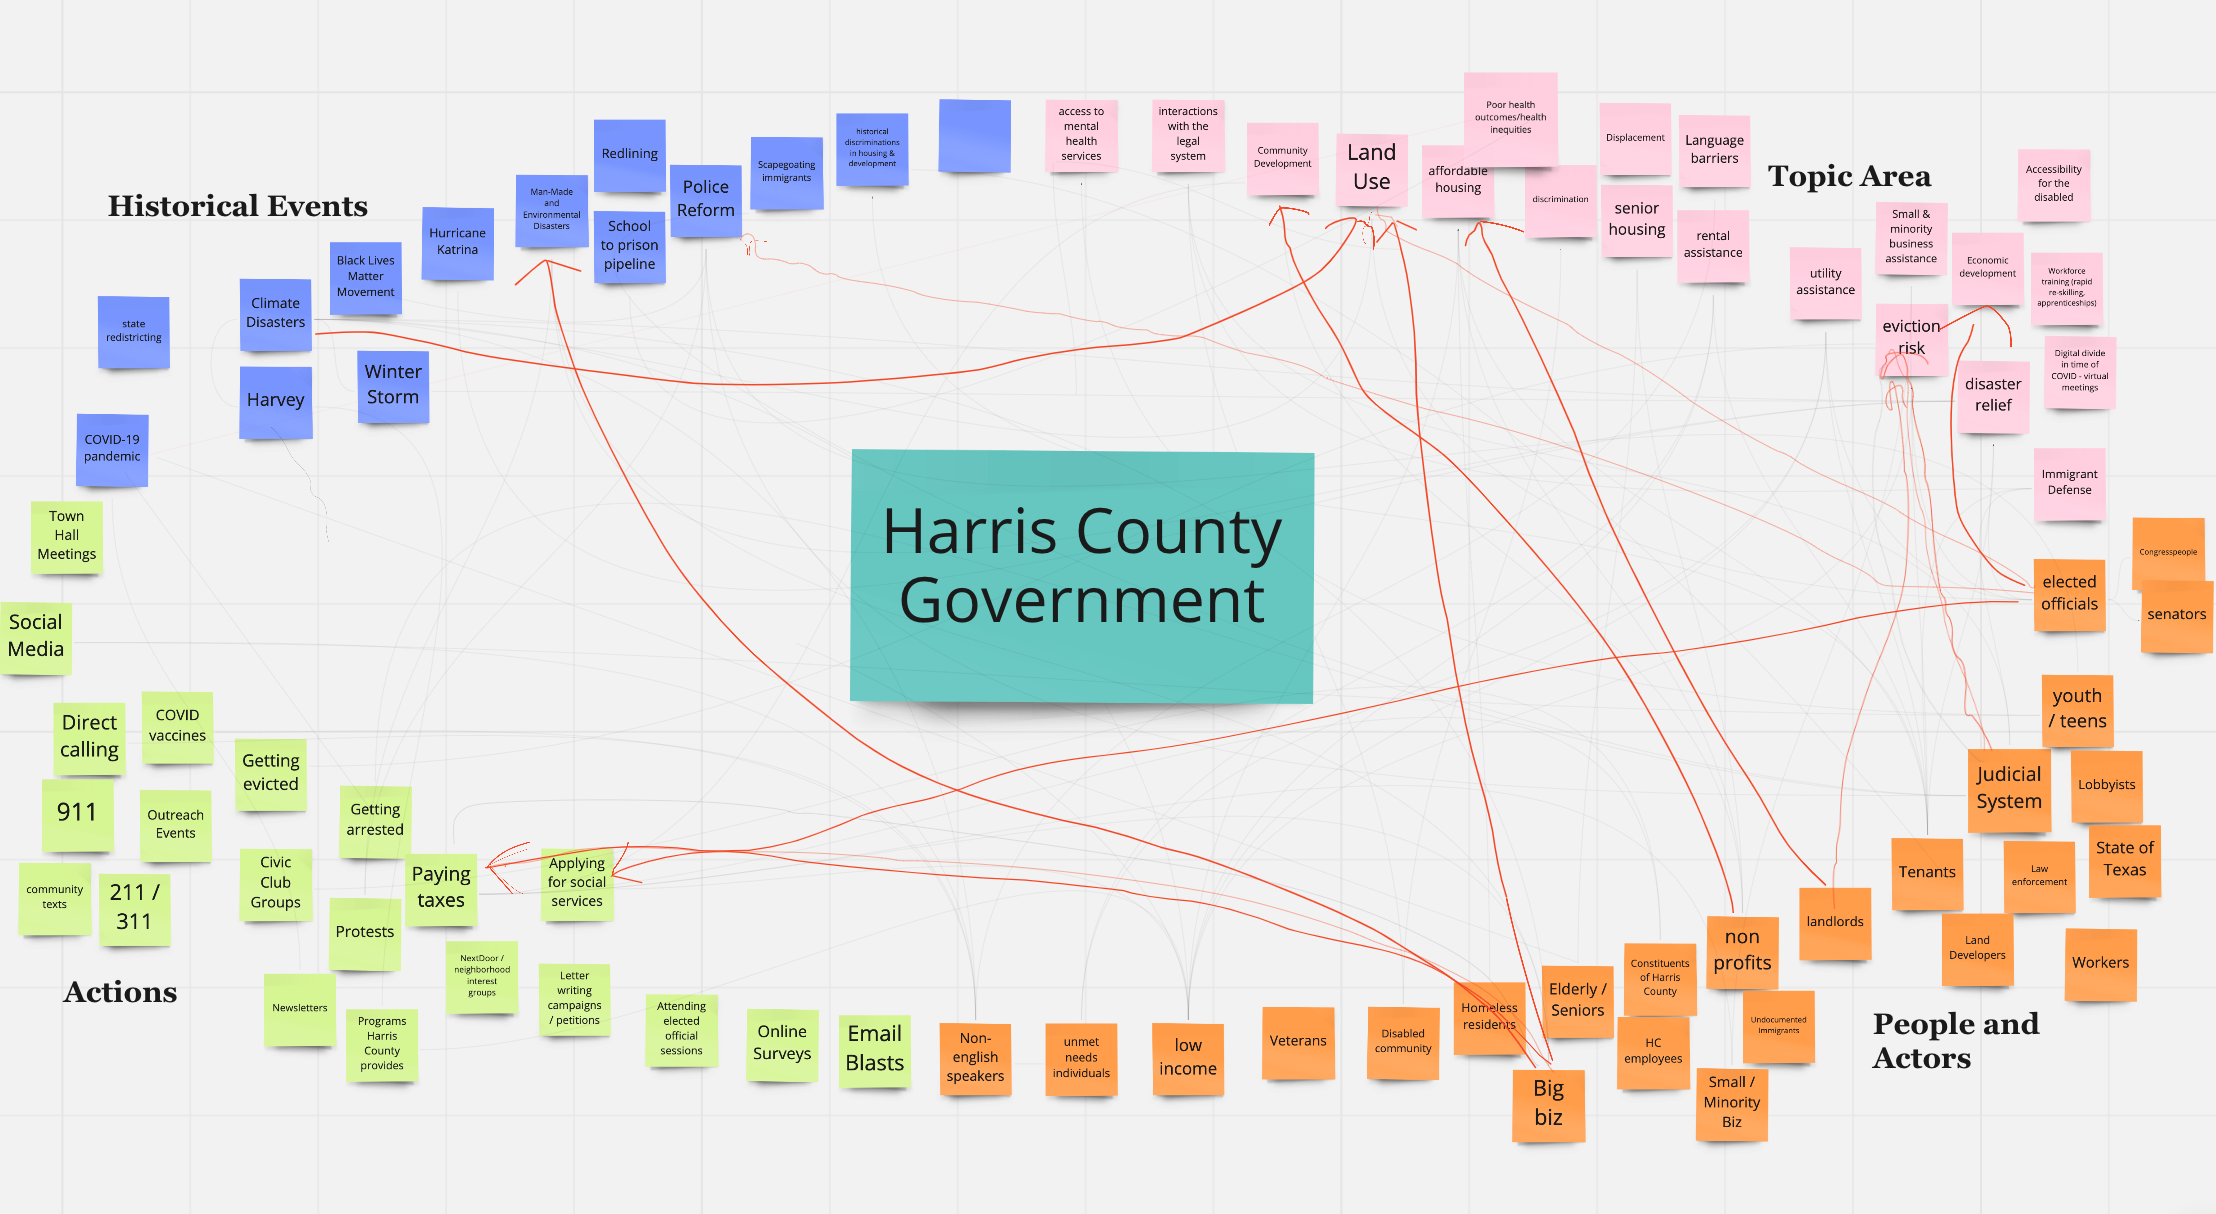 Systems Map example from the Harris County, TX team. The team used this tool to visualize the different actors and actions that impacted community trust. 